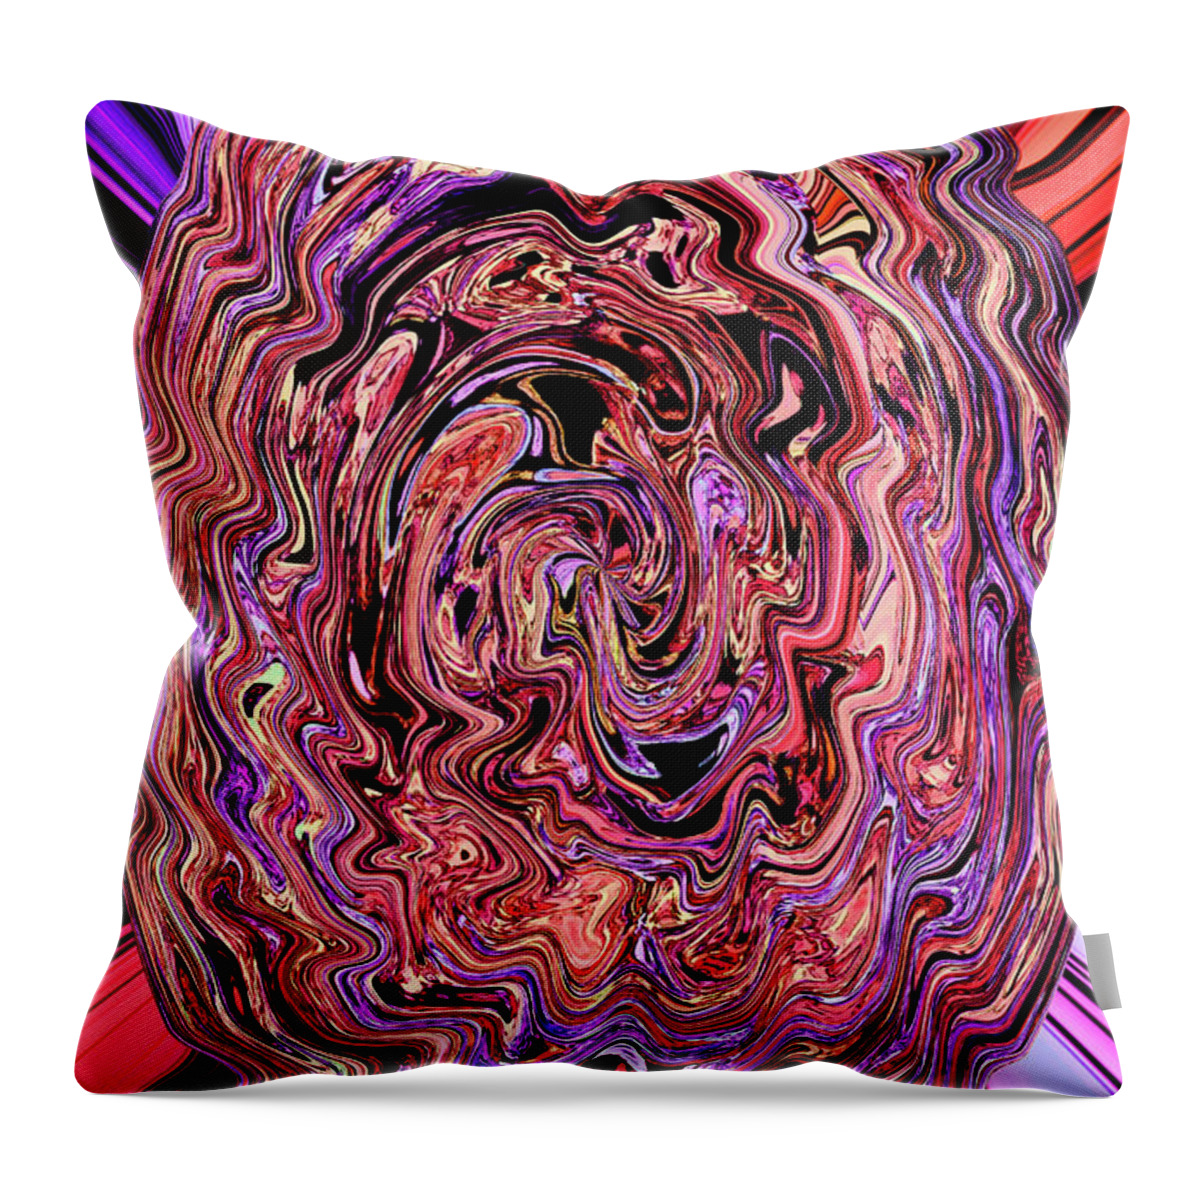 Time Warp Bubble #2 Throw Pillow featuring the digital art Time Warp Bubble #2 by Tom Janca